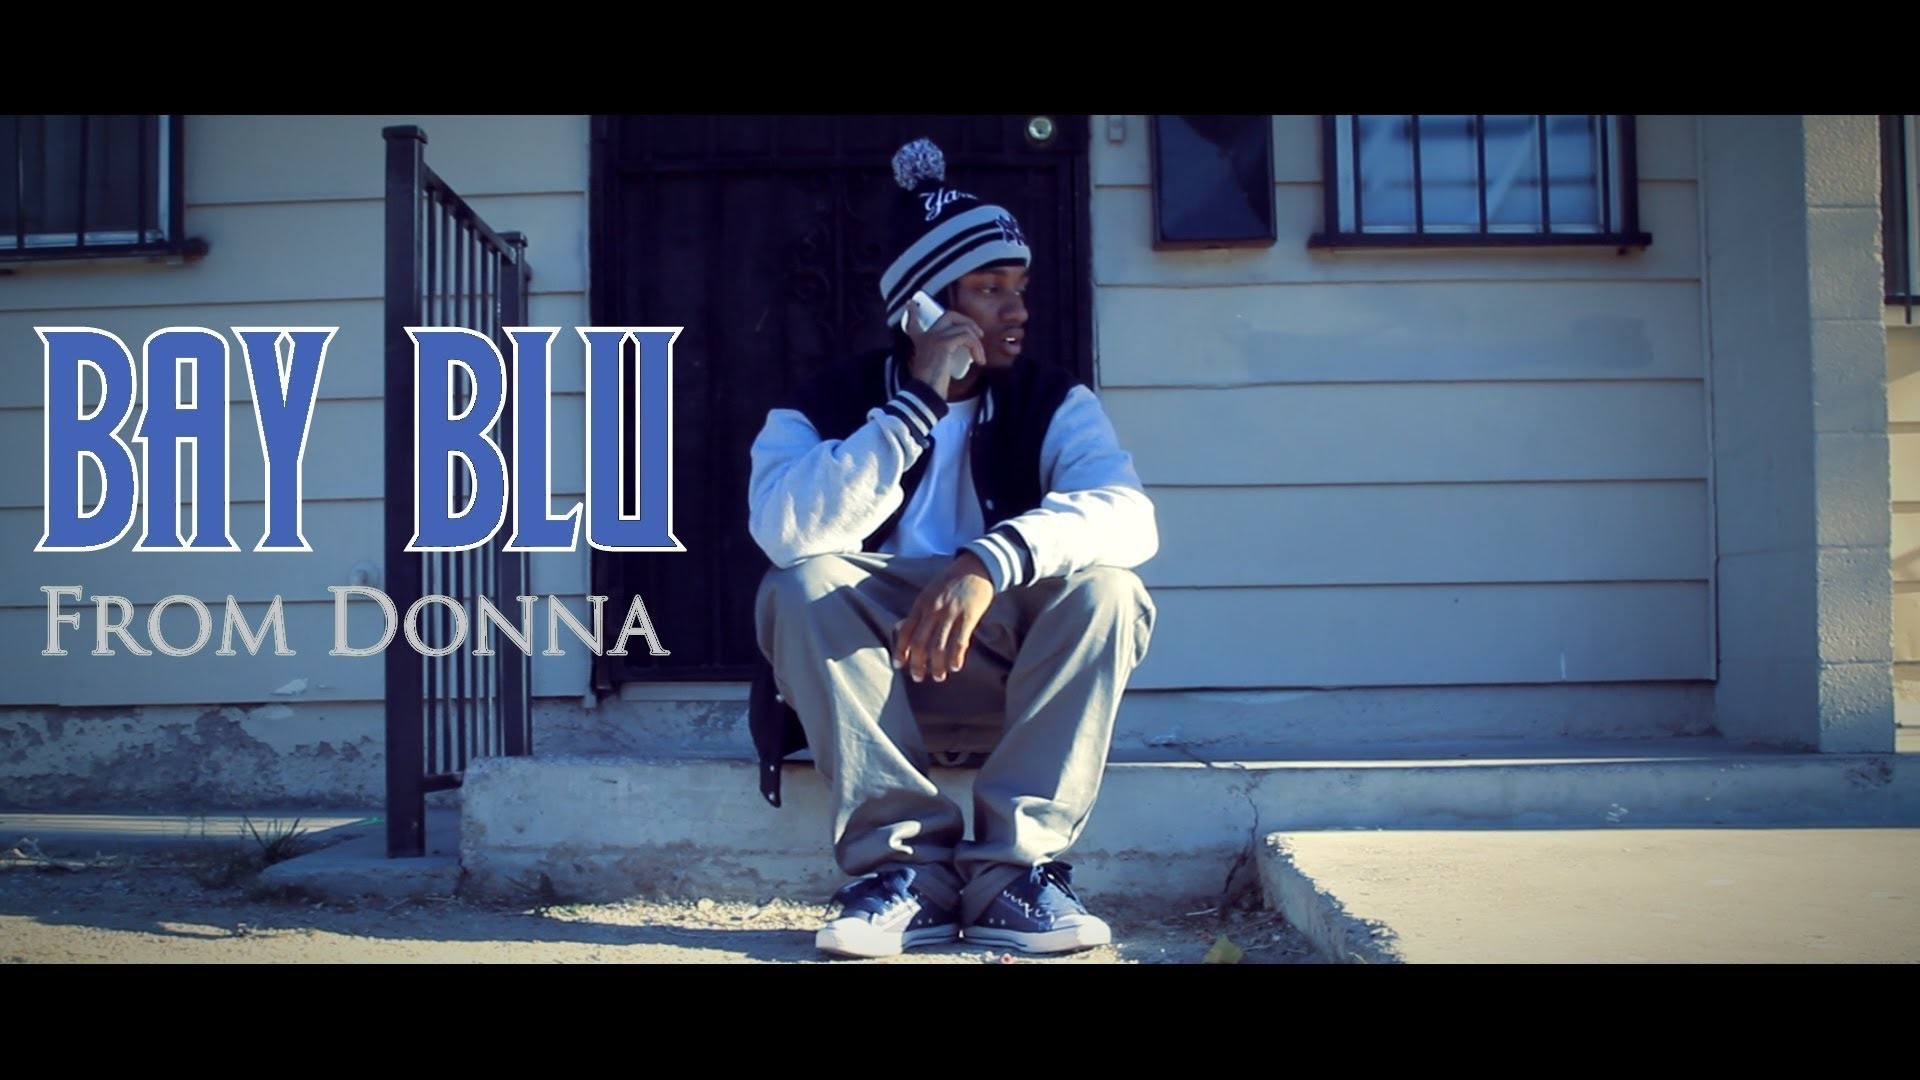 1920x1080 Bay Blu from Donna Street Crips, a Las Vegas street gang released a music  video